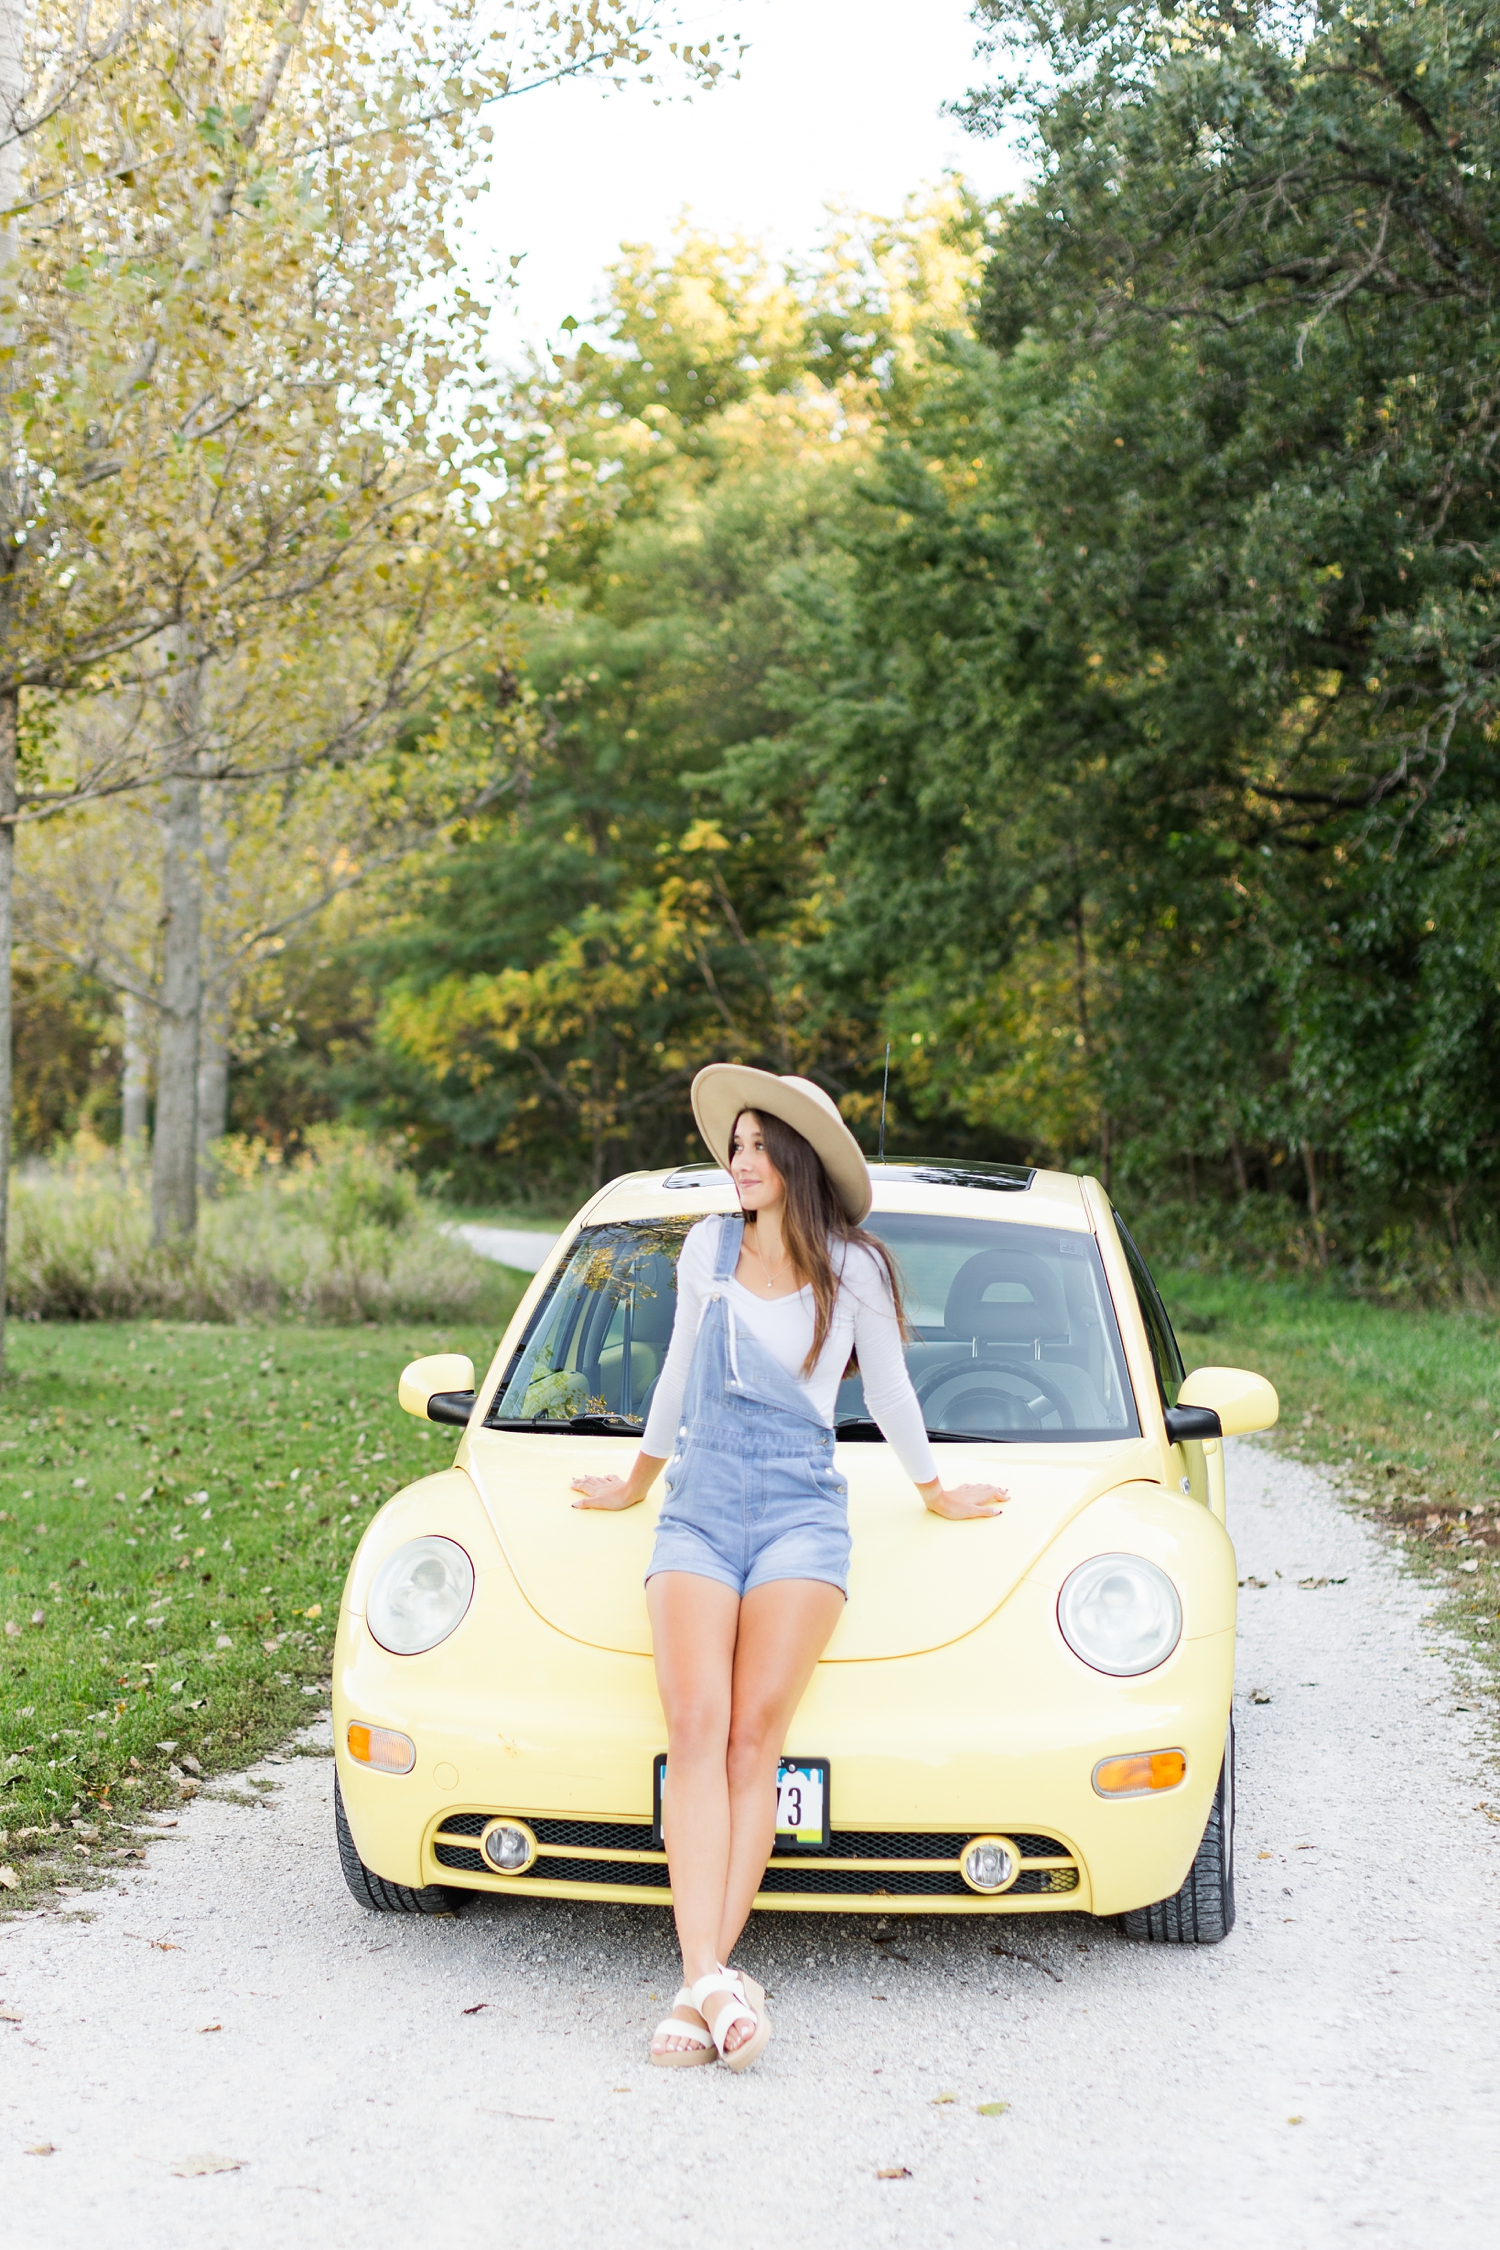 Sarah leans against the hood of her yellow VW Beetle in Sheldon Park in Humboldt, IA | CB Studio